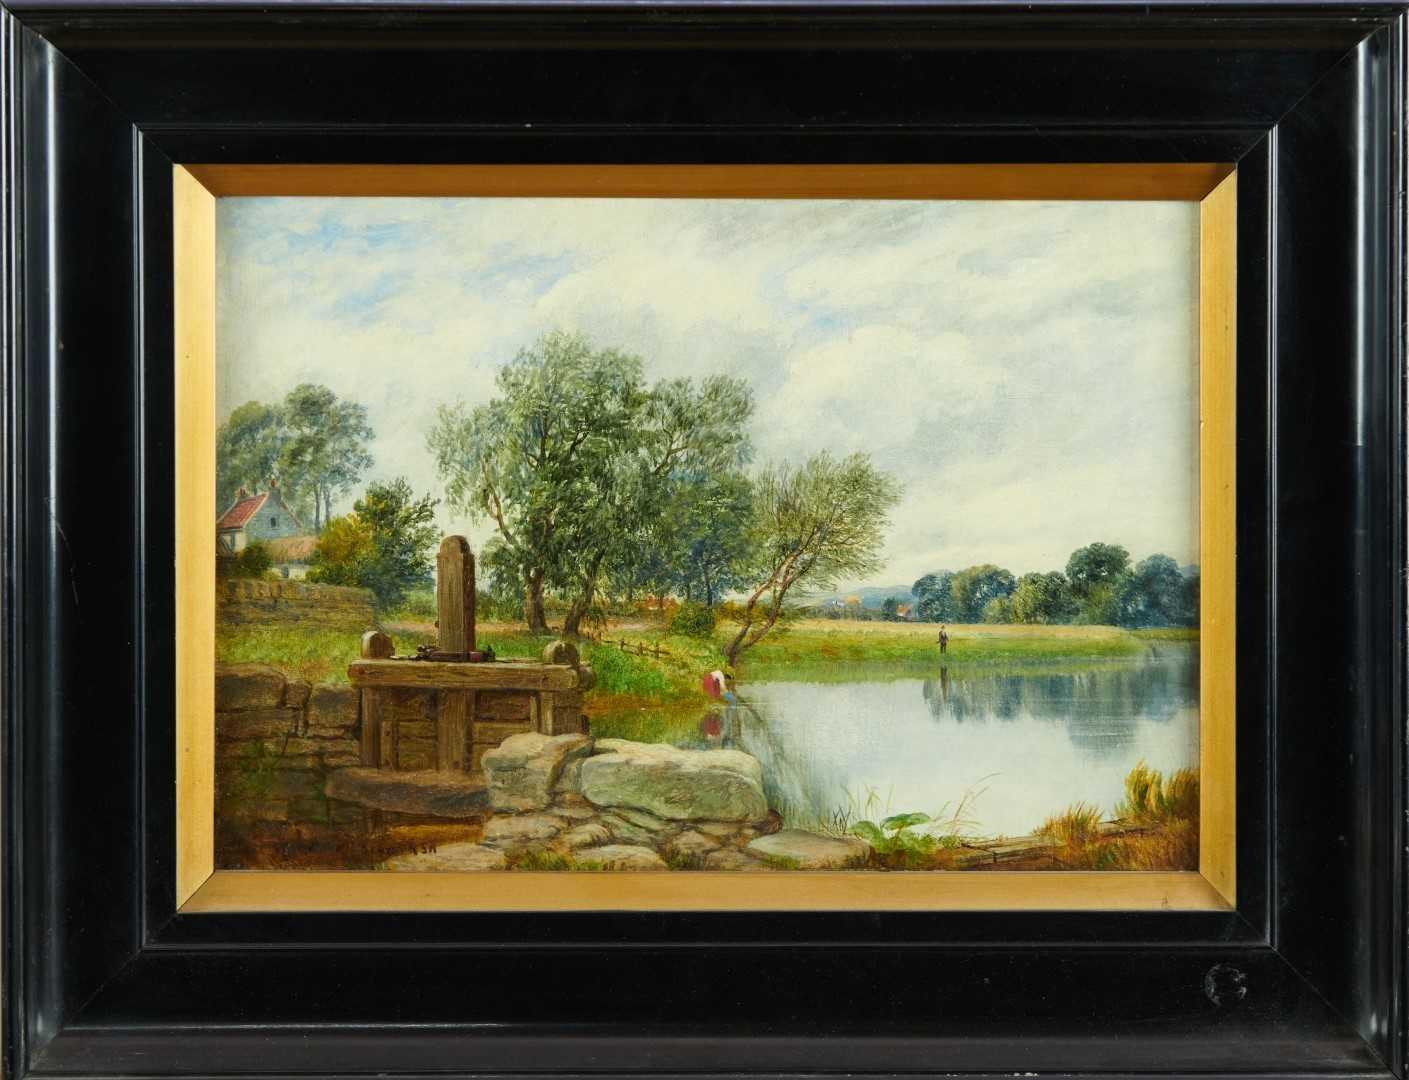 William Beatty Brown (1831-1909) oil on panel - river Landscape, signed, inscribed verso and dated 1